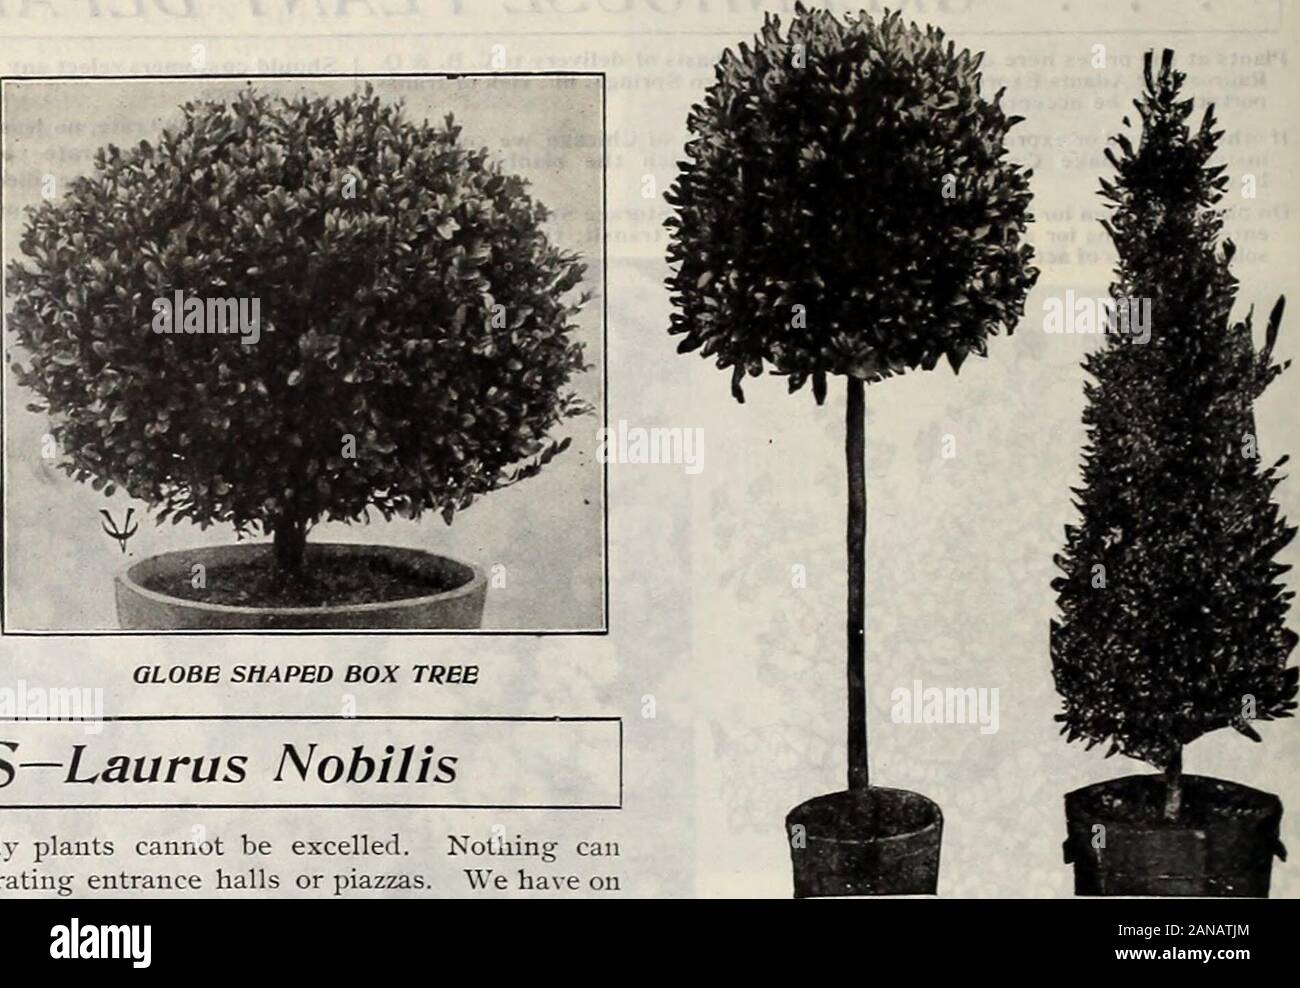 Vaughan's book for florists . STANDARD BOX TREE. BA Y TREES—Laurus Nobilis For decorative purposes these stately plants cannot be excelled. Nothing canapproach them as effective plants for decorating entrance halls or piazzas. We have onhand at all times a large stock of fine plants grown in standard and pyramidal form. STANDARD or TREE SHAPED BAYS— (See cut) Stems Crowns Each 38-40 in 22- 42-46 in 45-48 in 45-48 in 45- 48 in 46- 54 in 46-54 in 24 in $ (S.50 24 in 6.75 26 in 7.50 28 in 8.00 30 in 10.00 34 in 12.00 40 in 15.00 Stems24-30 in. Each.$ 7.50 DWARF STANDARDS Crowns 24-26 in PYRAMIDAL Stock Photo